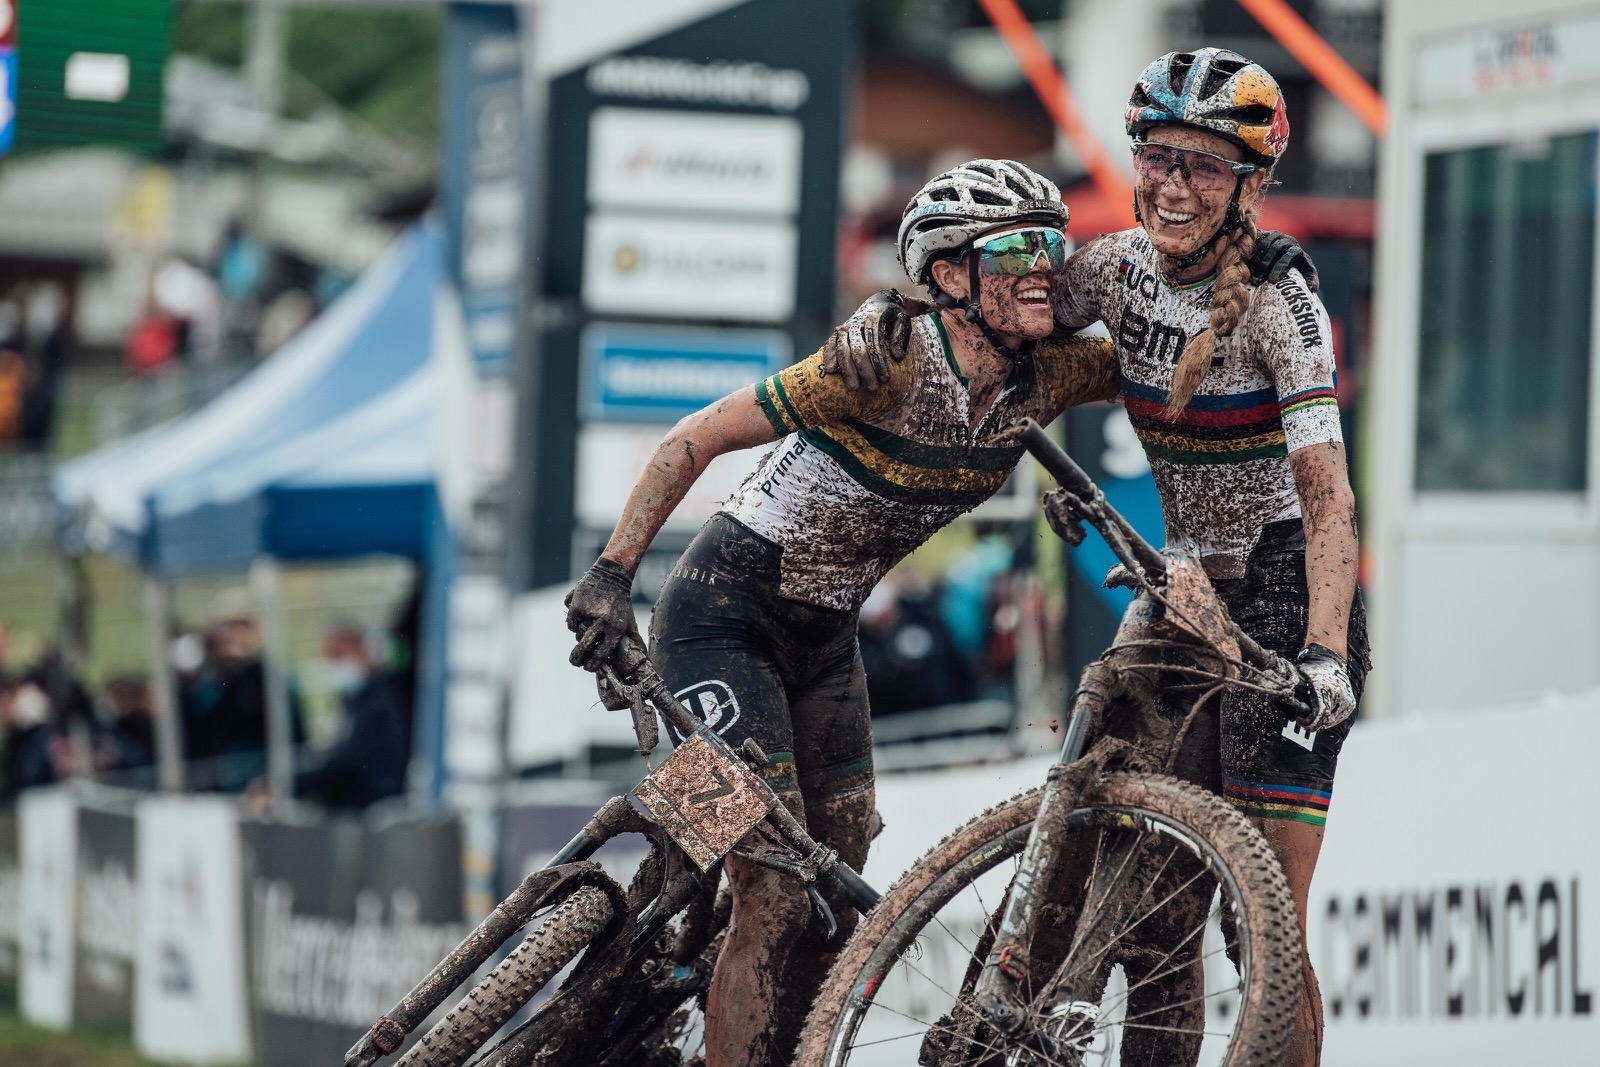 Les Gets World Cup wrap up - Australian Mountain Bike | The home for ...